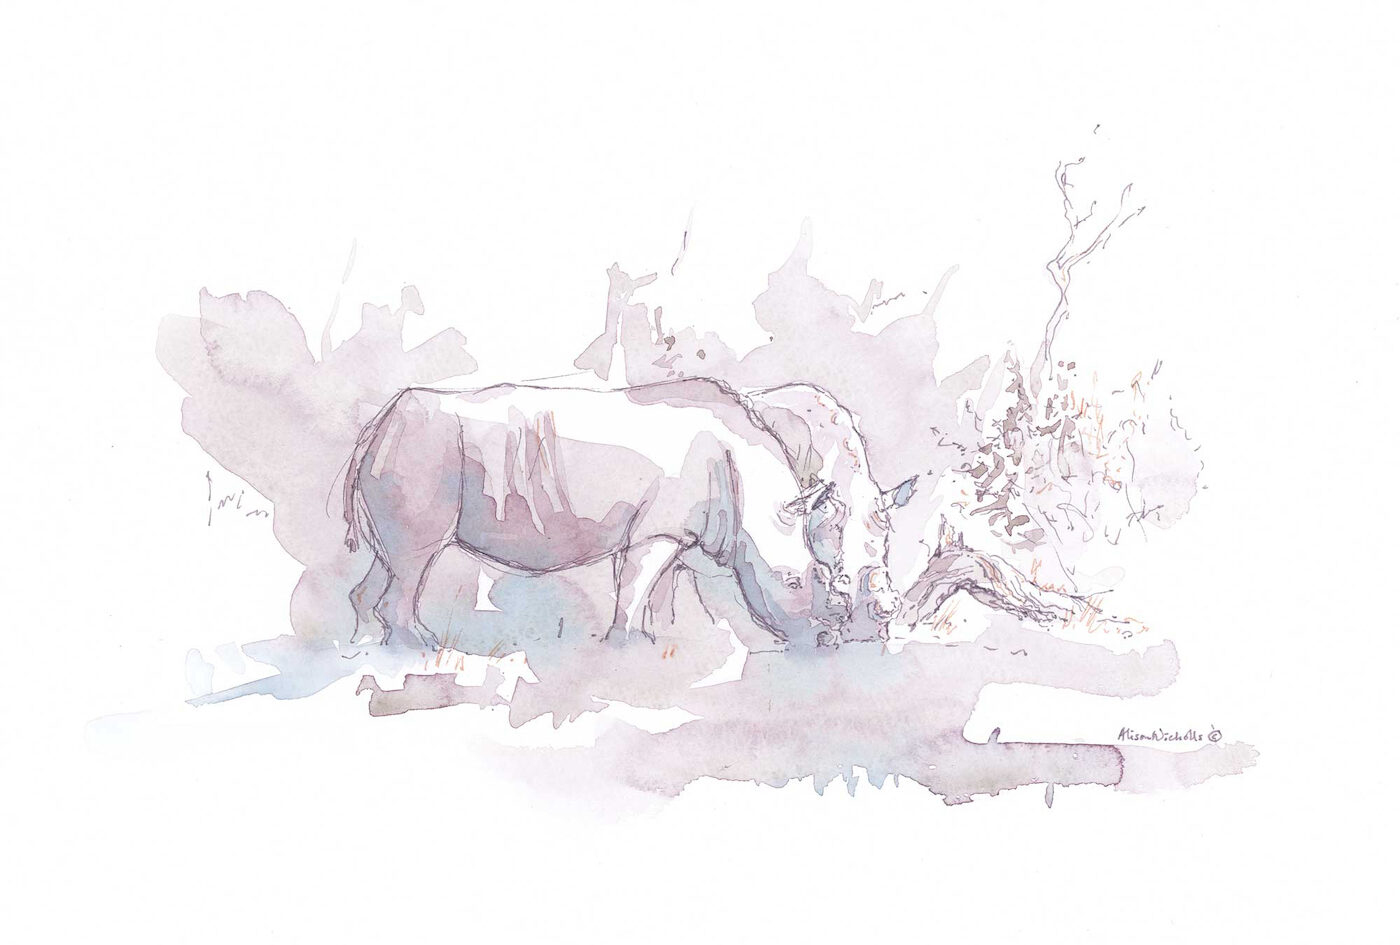 2 white rhinoceros drink together from a waterhole, painted in watercolor and ink by Alison Nicholls.